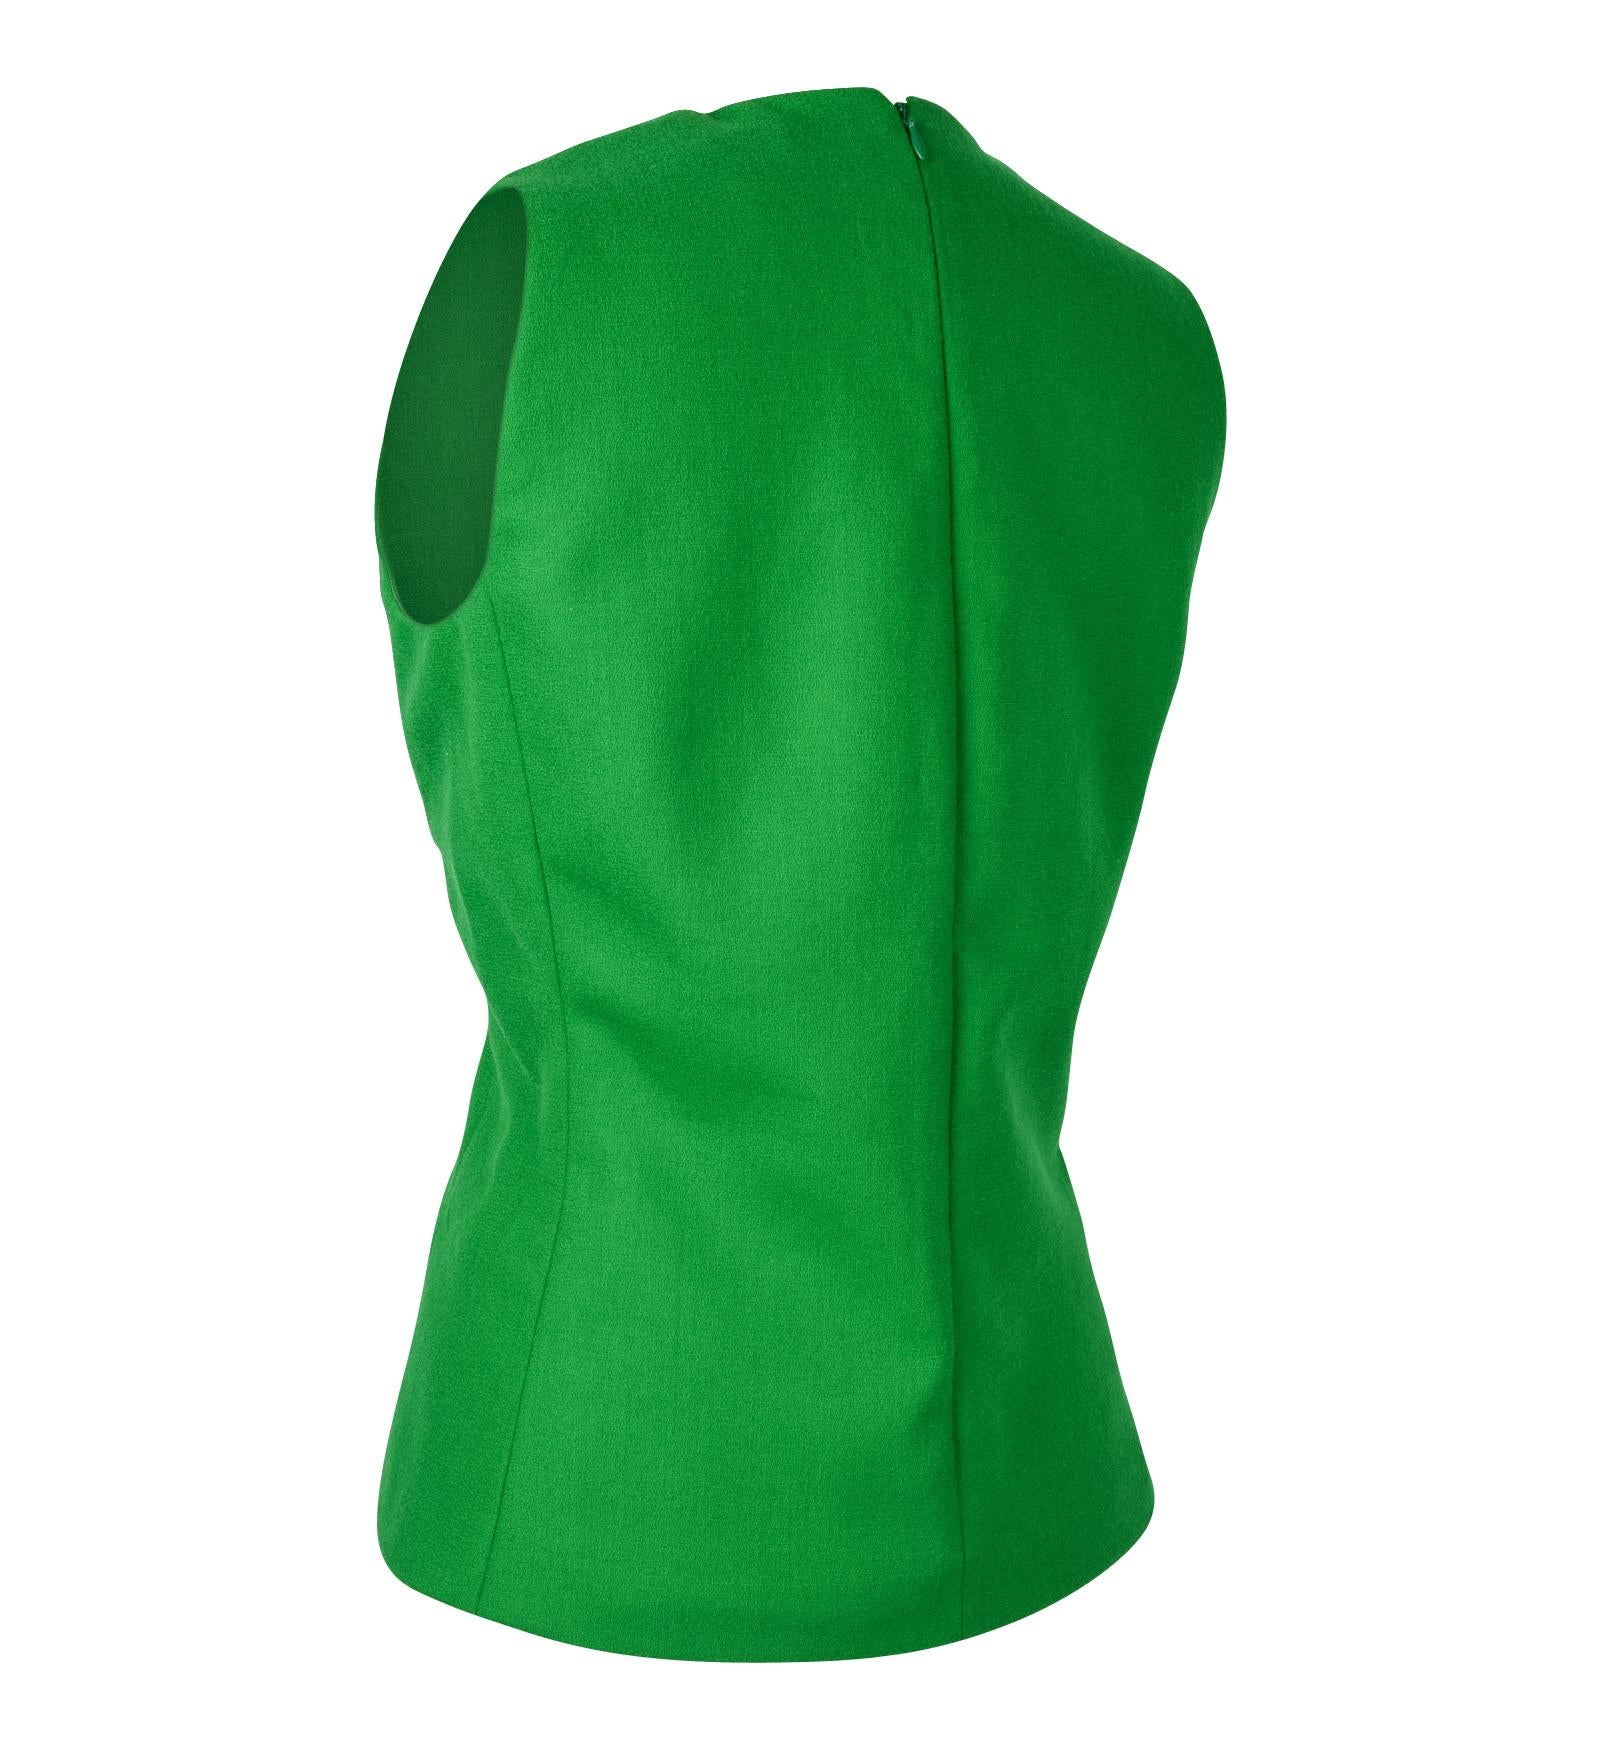 Christian Dior Top Emerald Green Sleeveless Shaped and Fitted fits 8 1